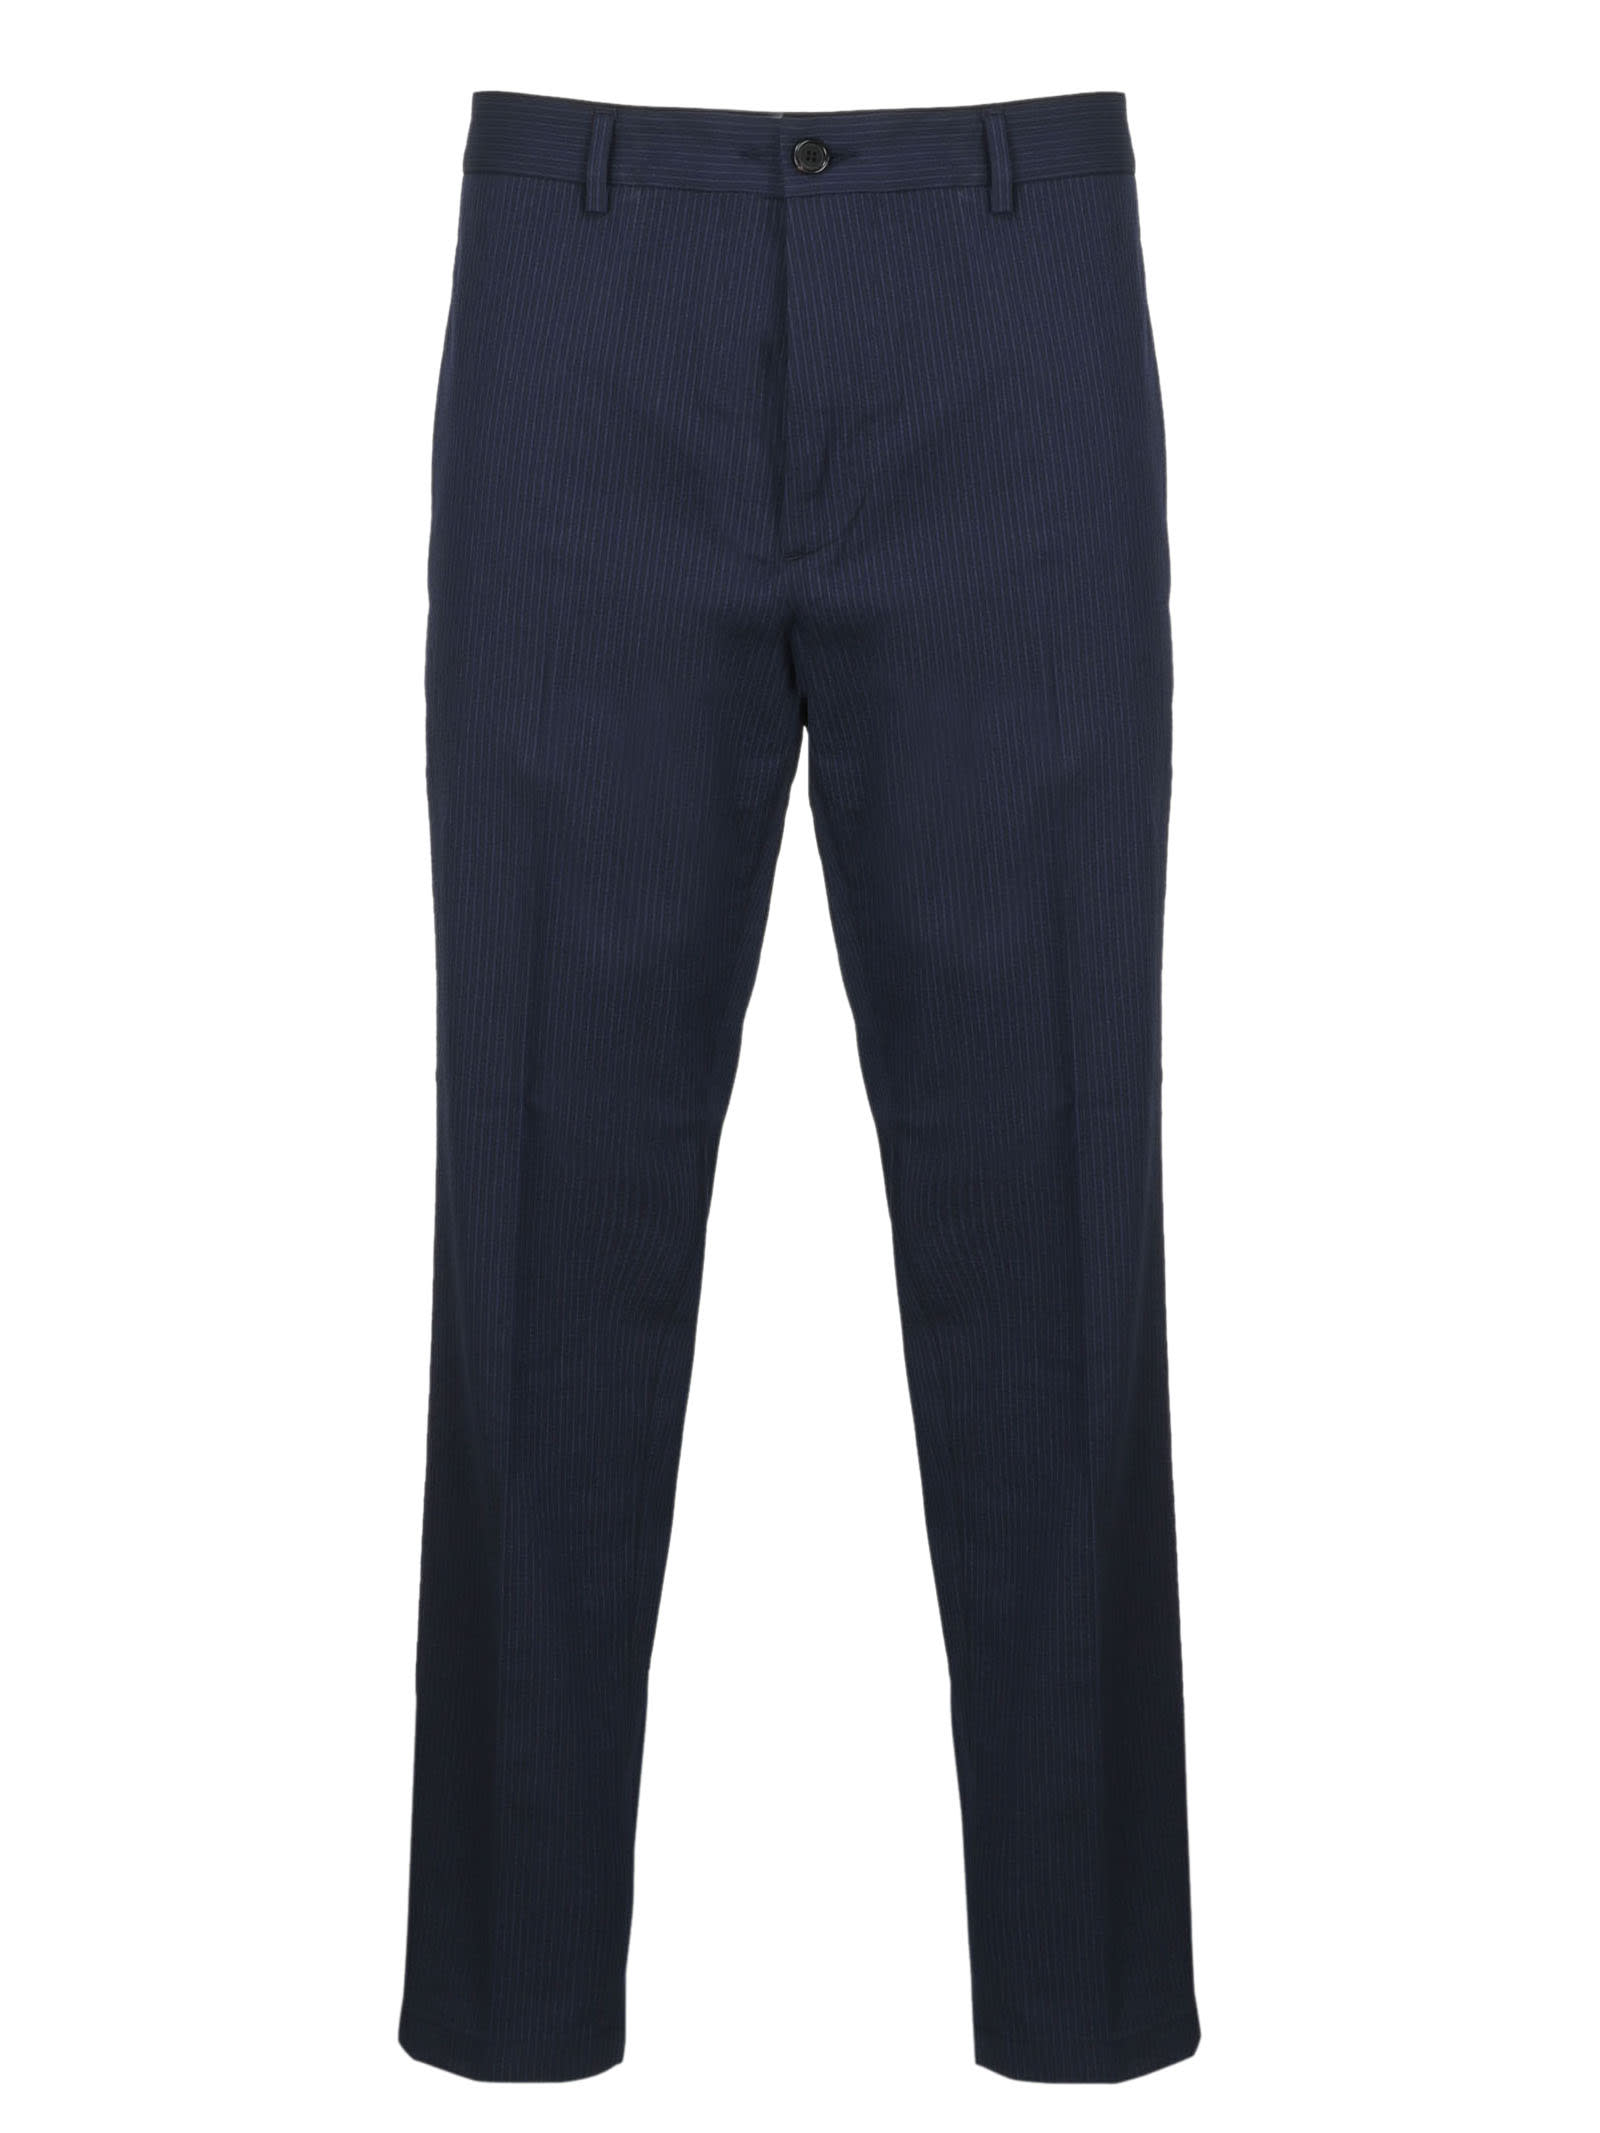 Department 5 George Chino Pants